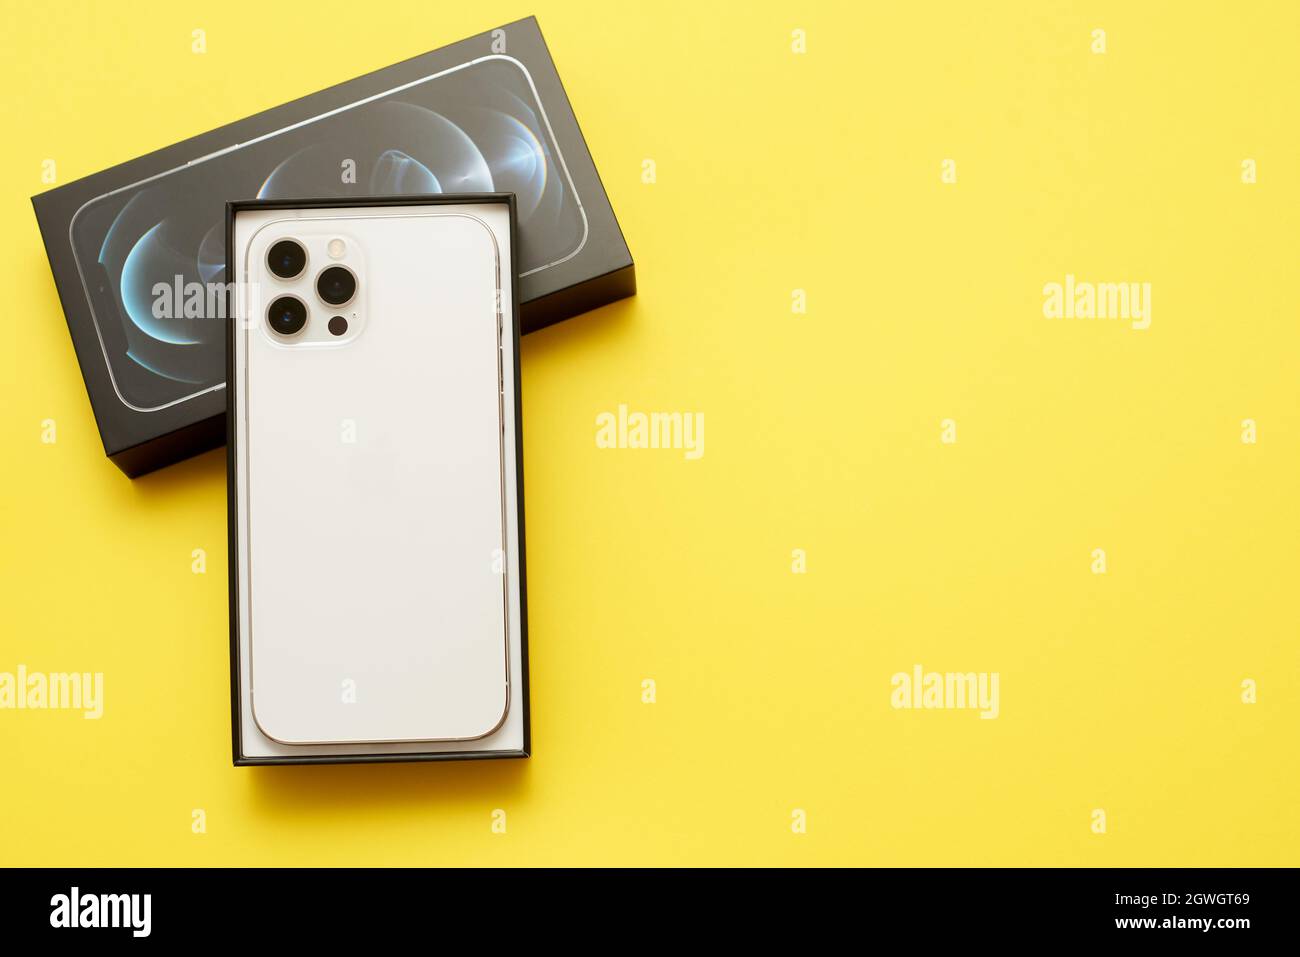 STARIY OSKOL, RUSSIA - JULY 5, 2021: Unboxing new iPhone 12 pro max on a  yellow background with copy space Stock Photo - Alamy